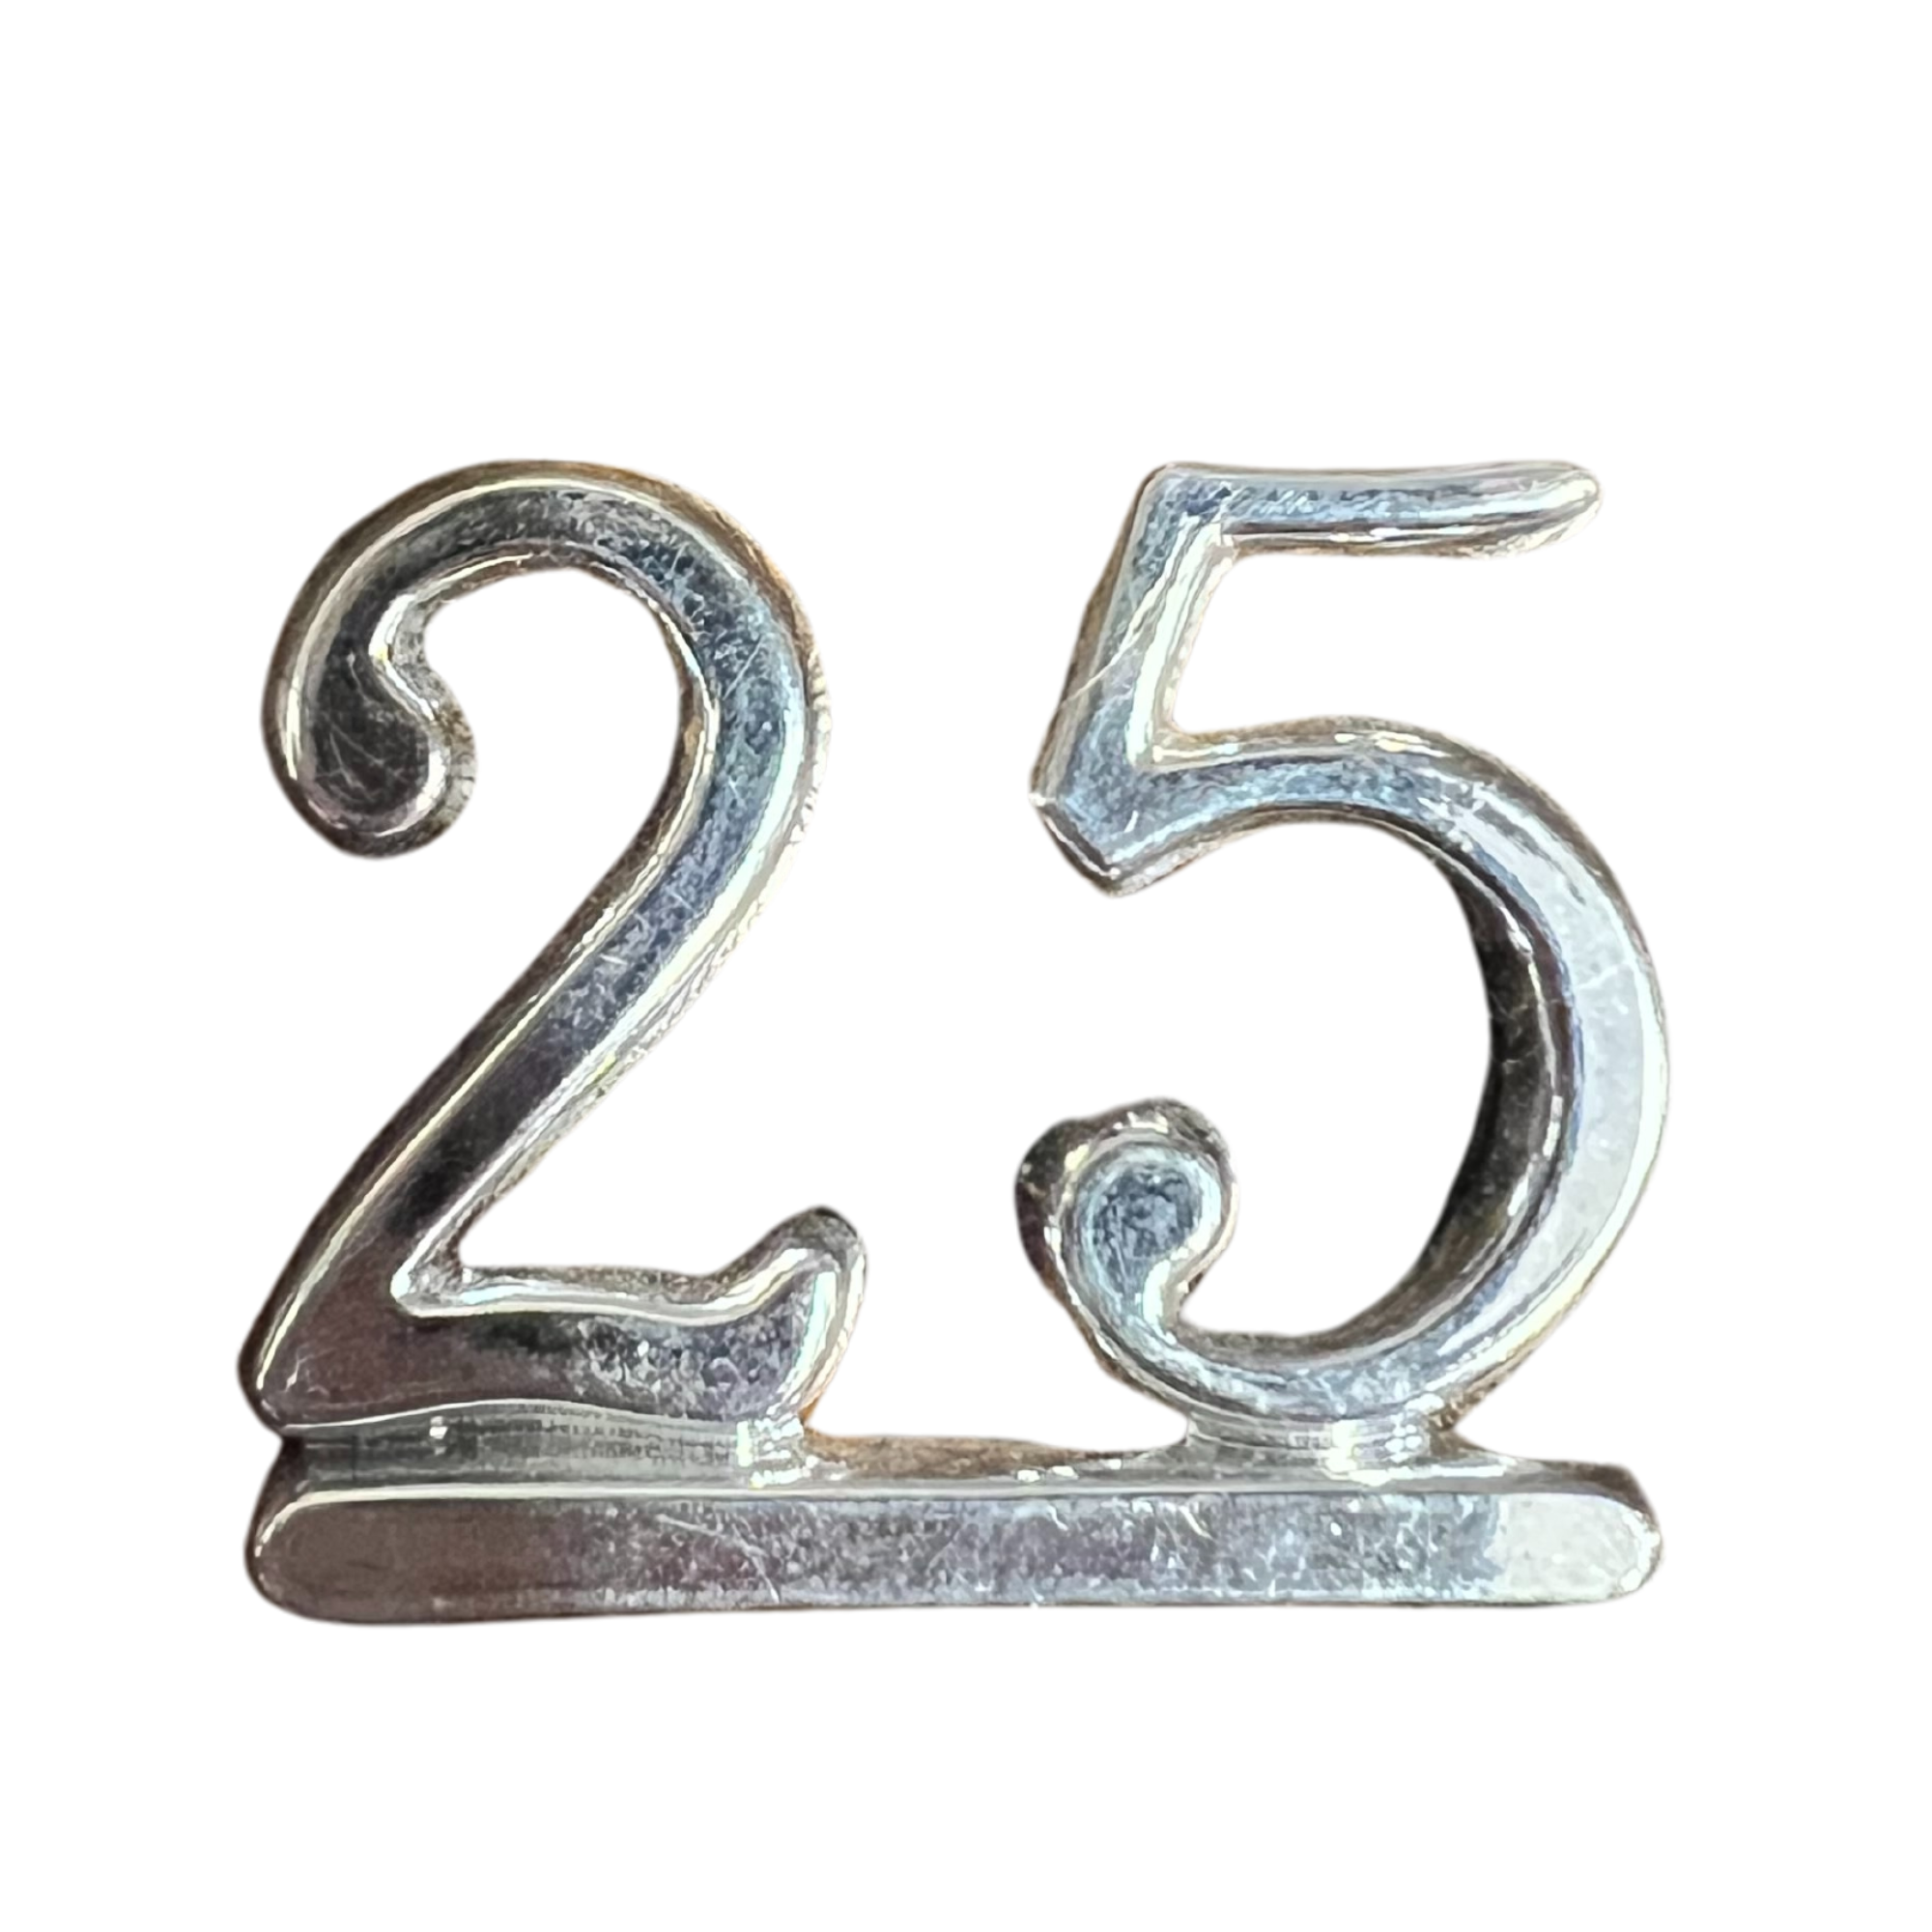 Small Number / Numeral Plastic Cake or Craft Decoration - Silver 25